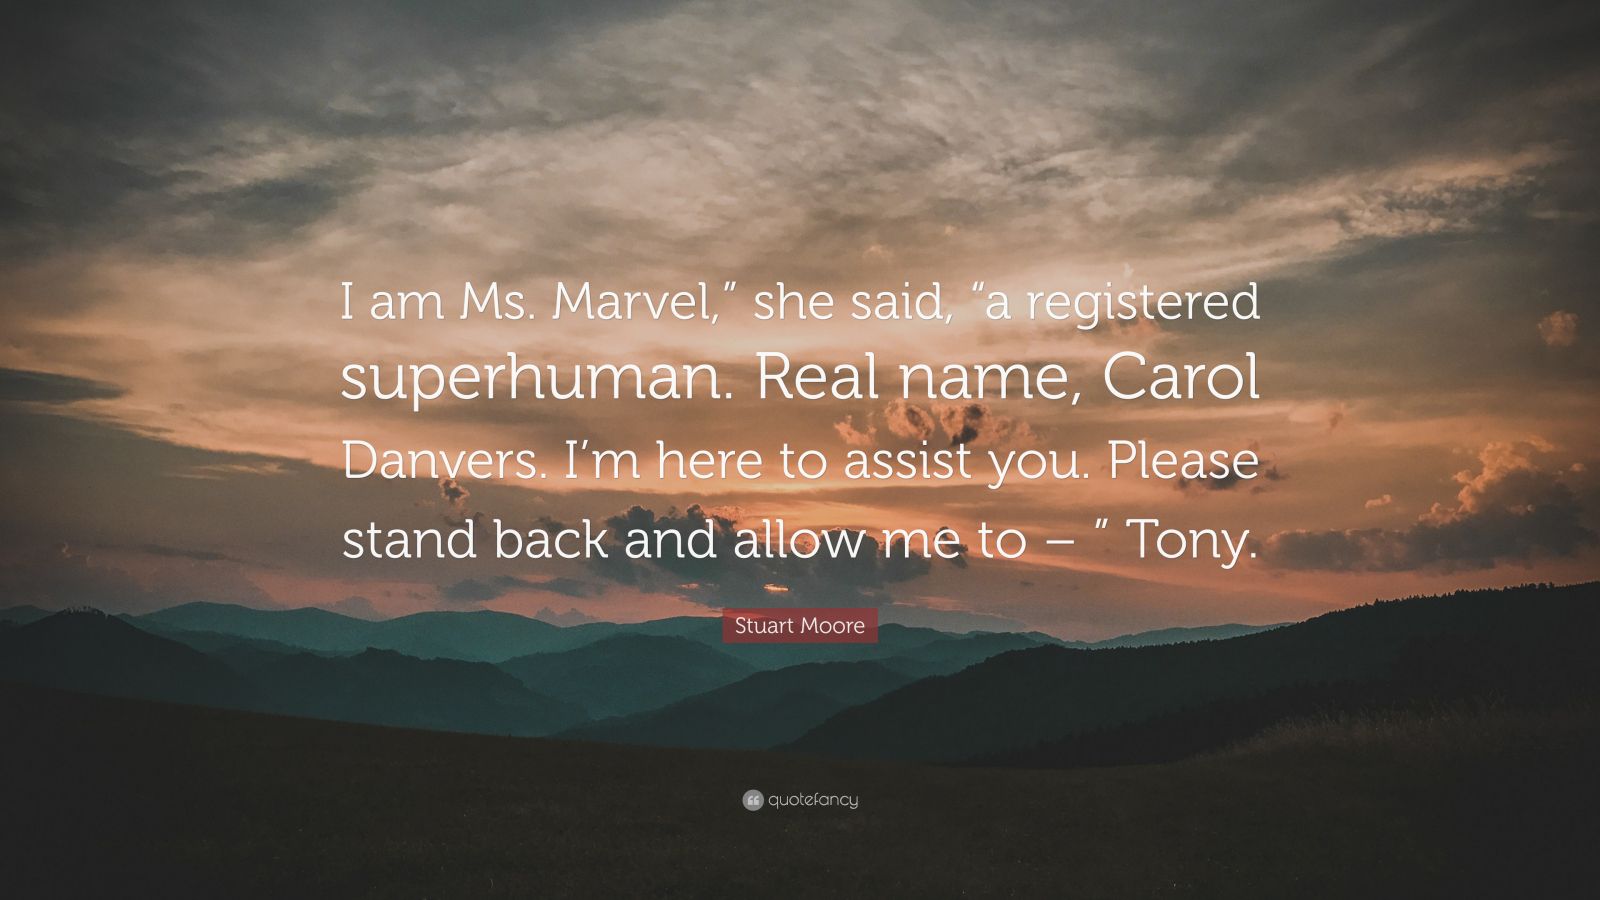 And Tony's real name is . . .?